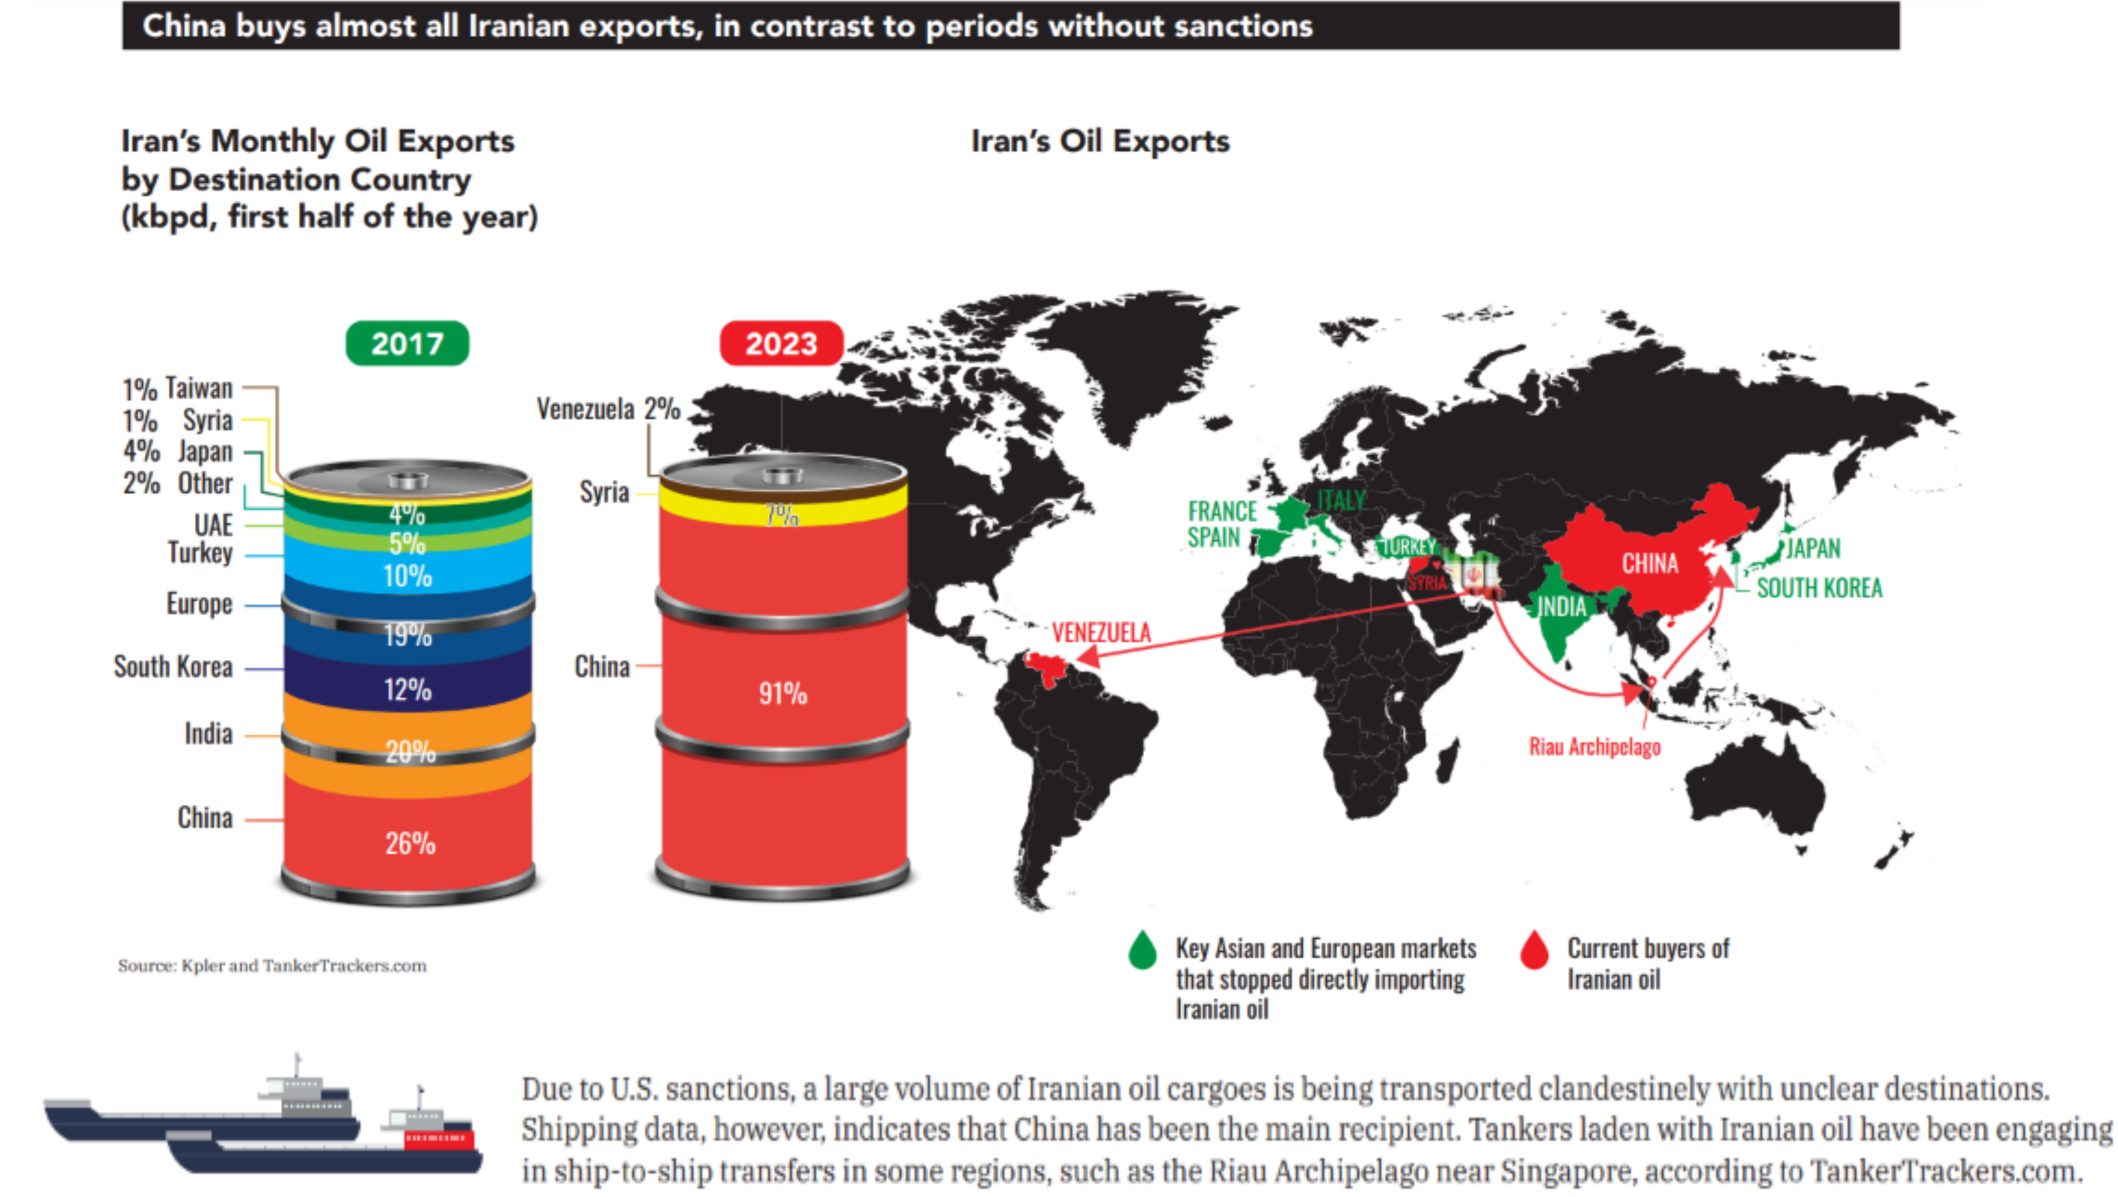 Iranian Oil Exports Pictograph